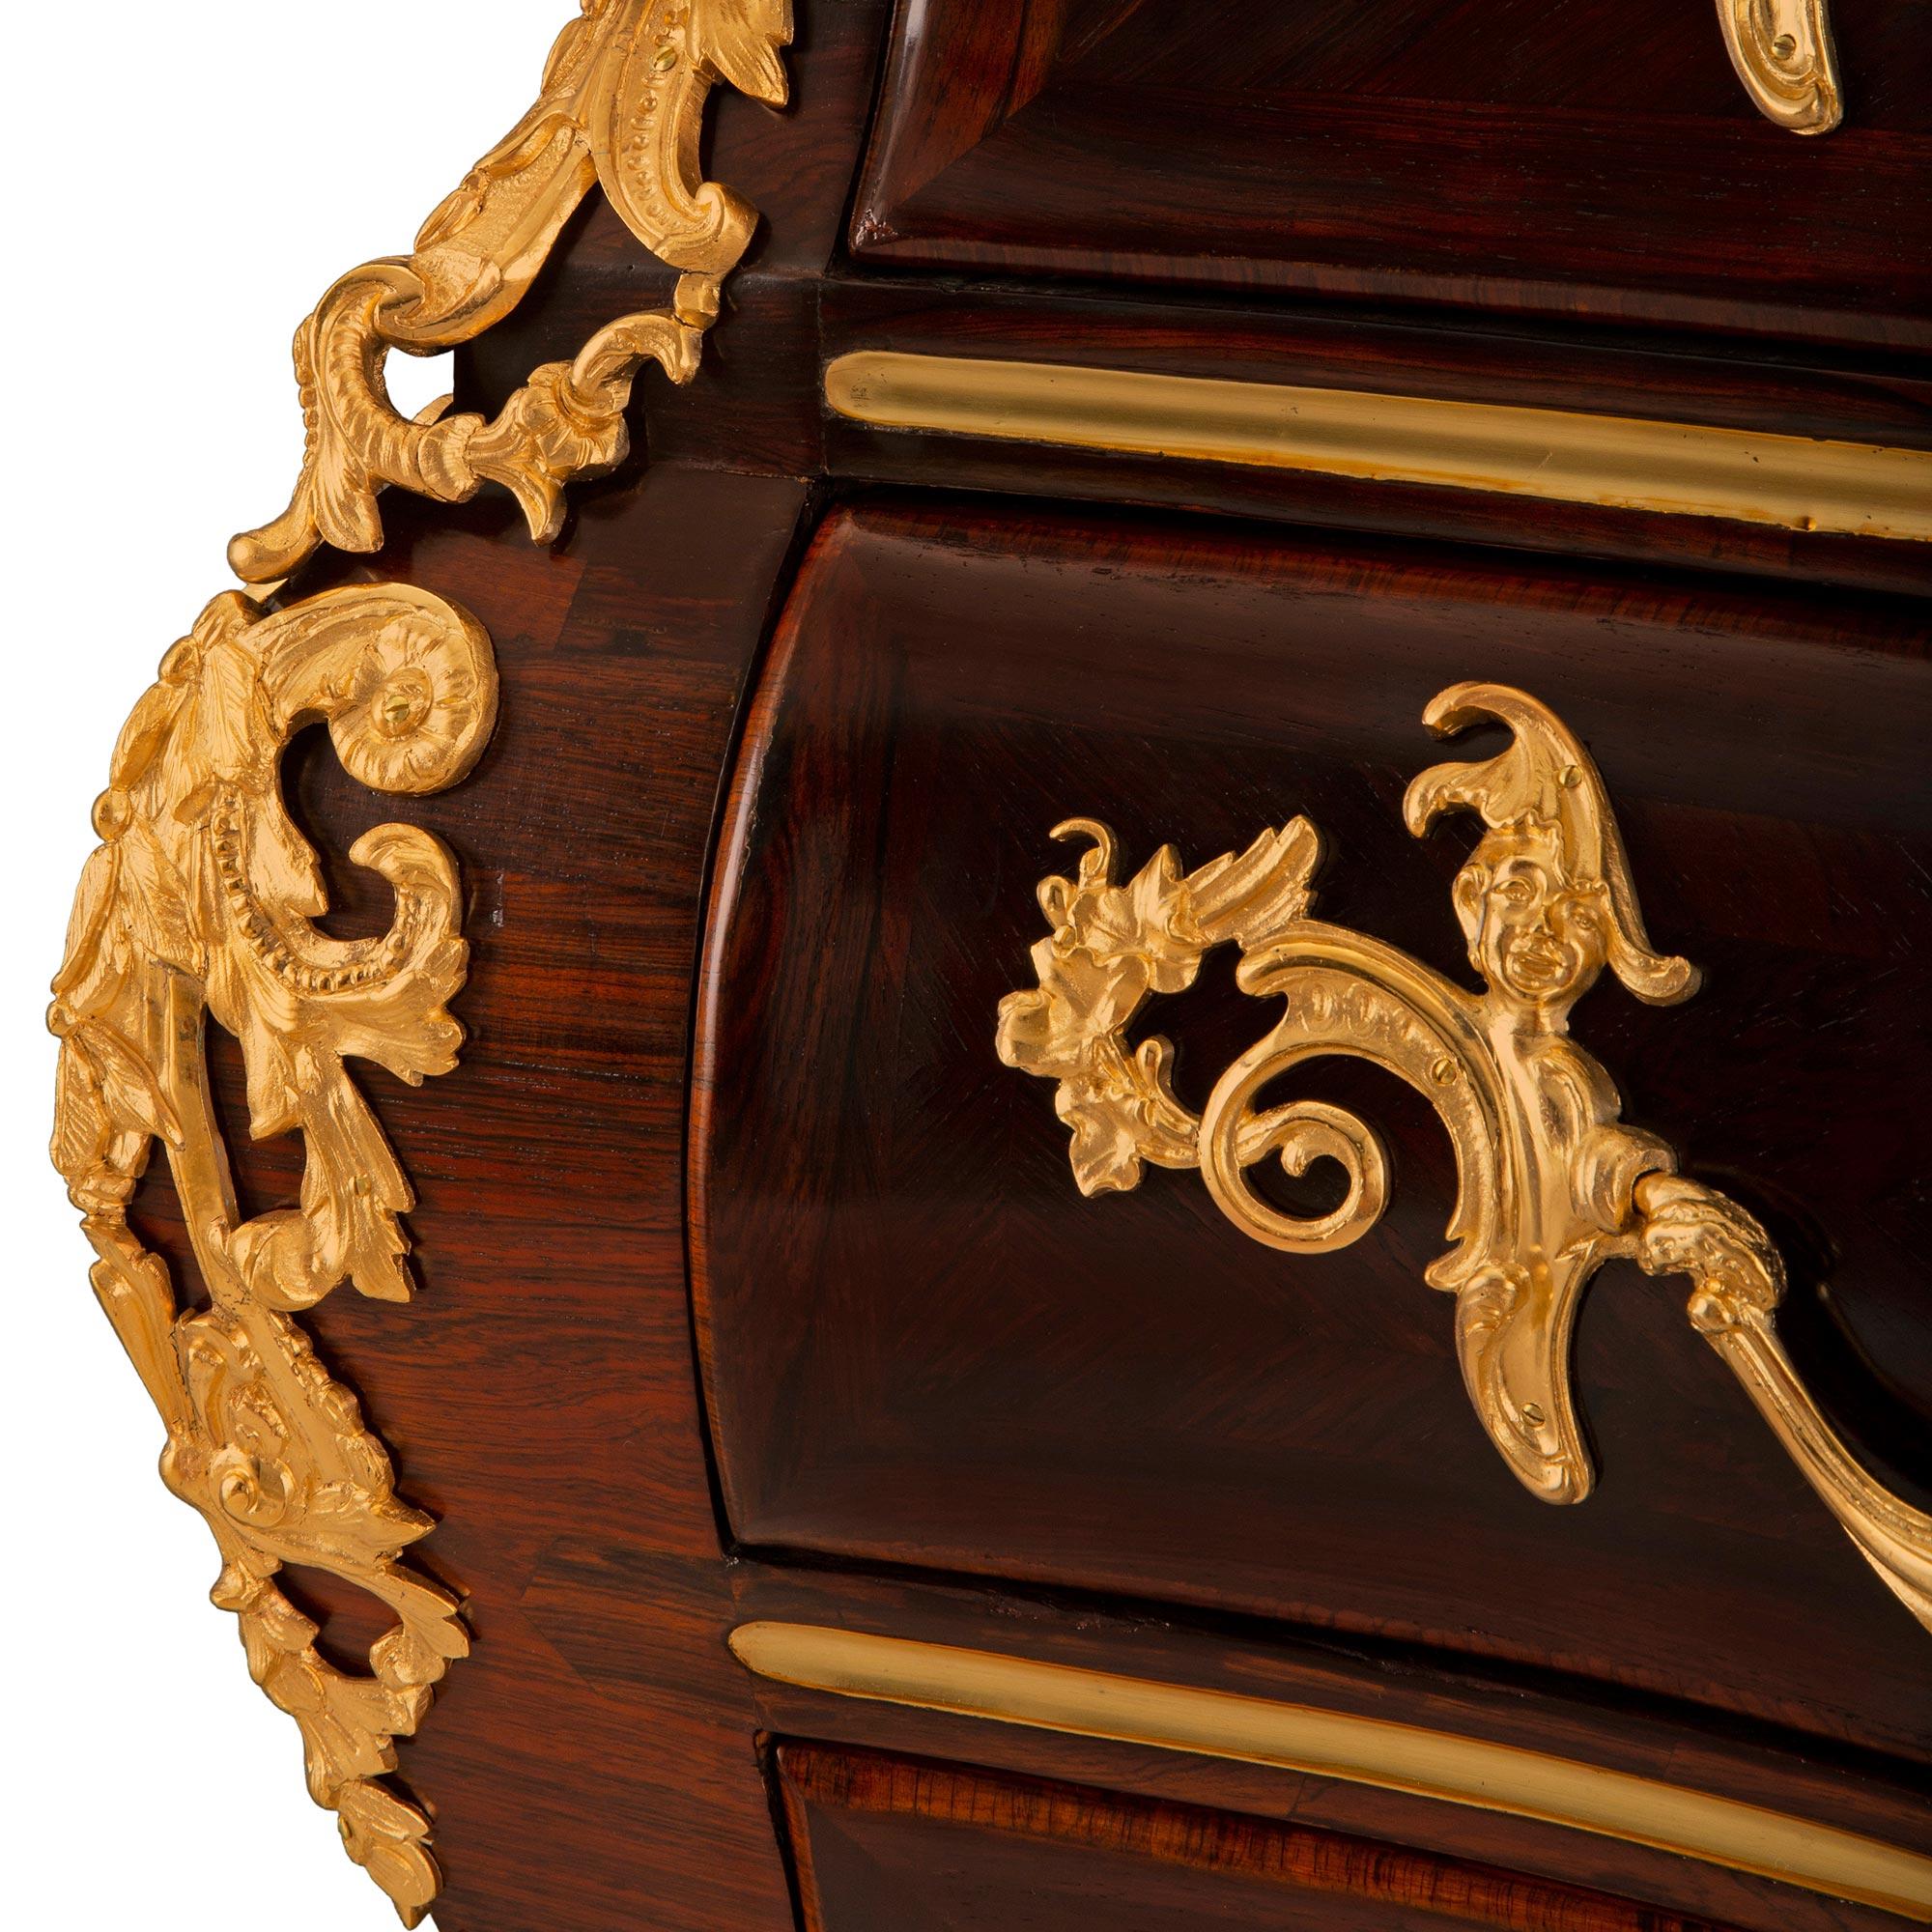 French Mid-18th Century Régence Period Rosewood, Ormolu and Marble Commode For Sale 3